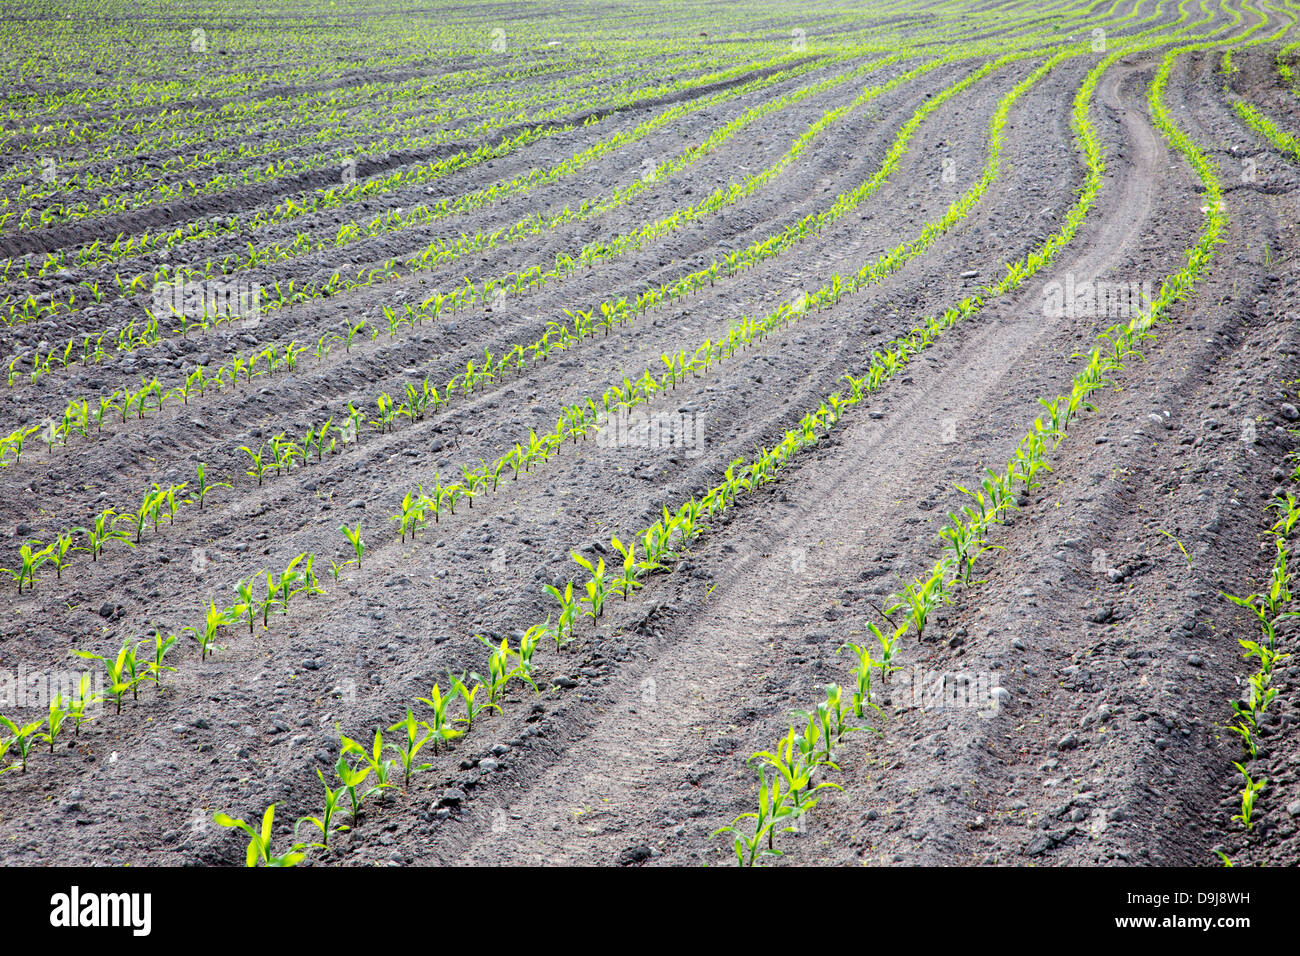 field of maize in spring Stock Photo